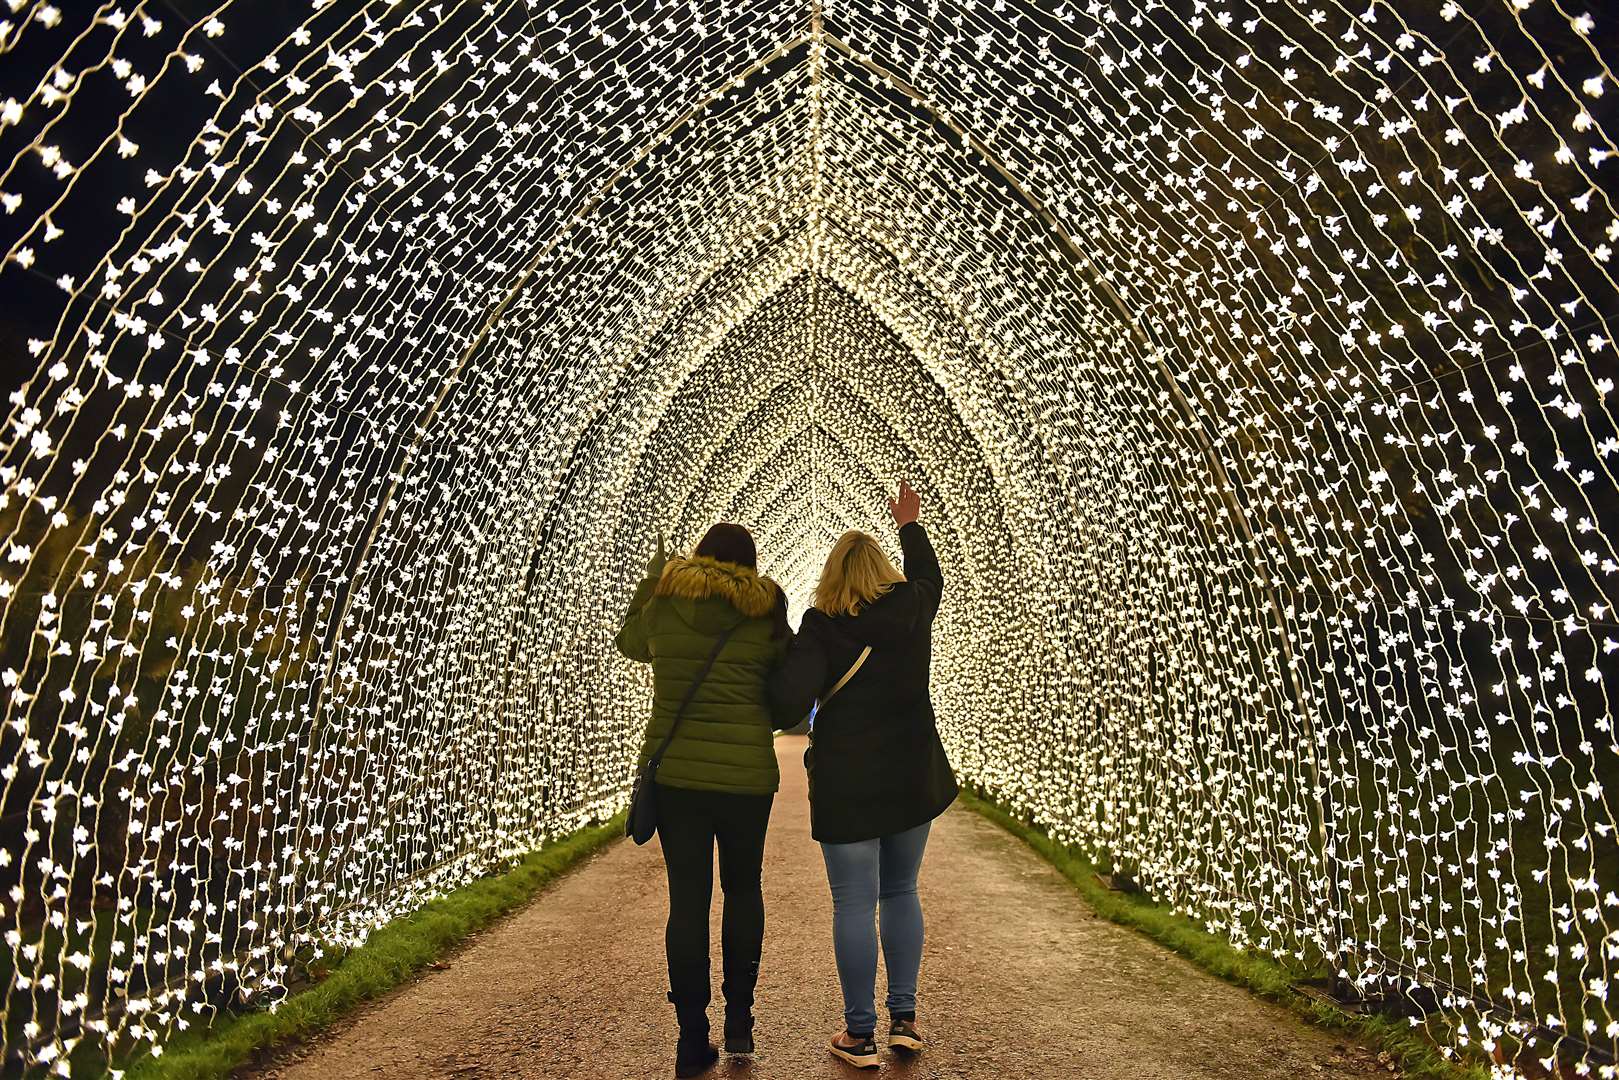 Bedgebury will have a tunnel of lights Picture: Christmas at Bedgebury